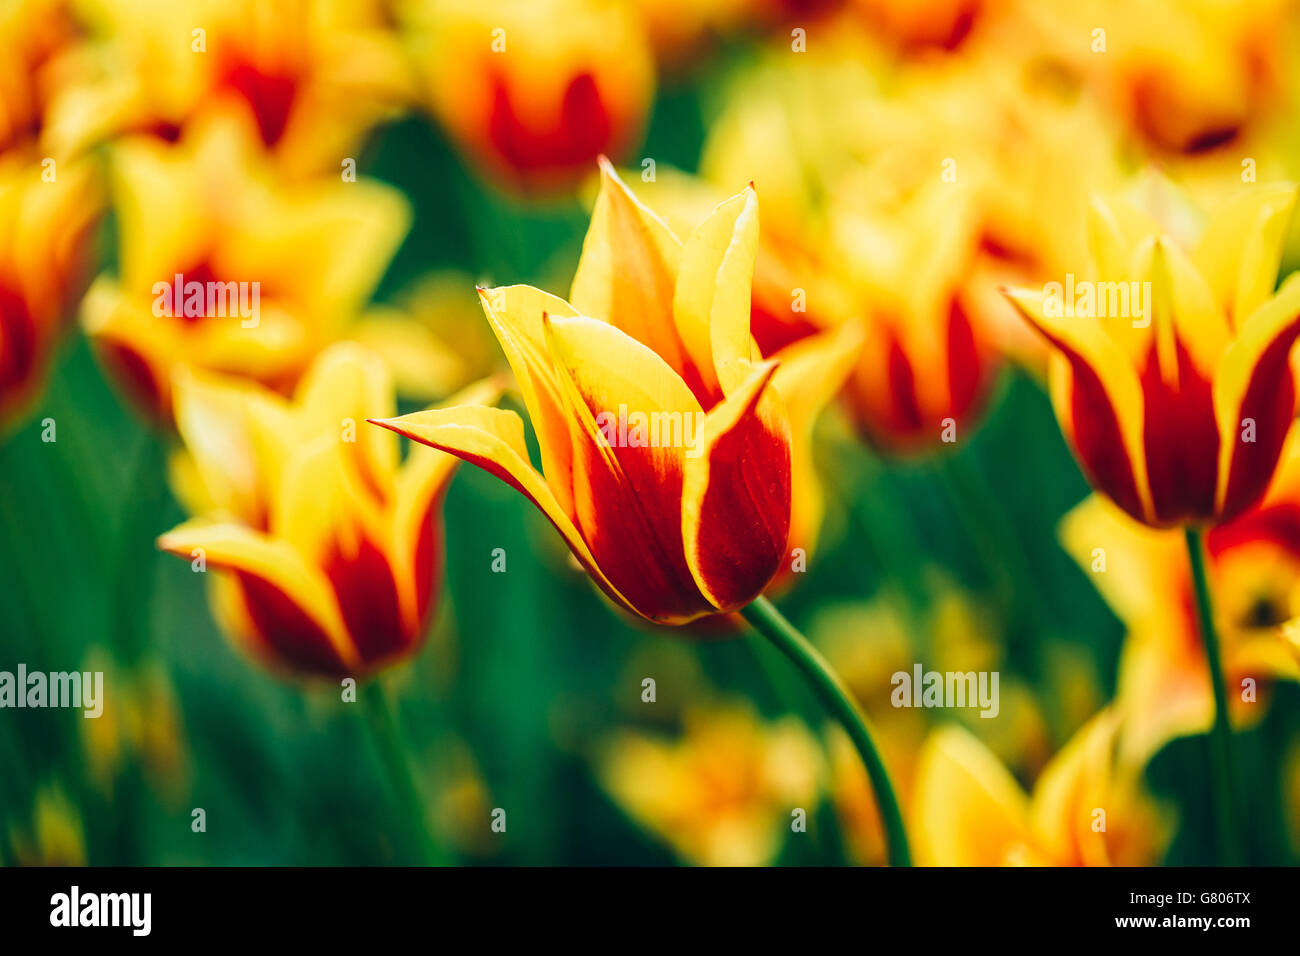 Yellow And Red Flowers Tulips In Spring Garden Flower Bed Stock Photo